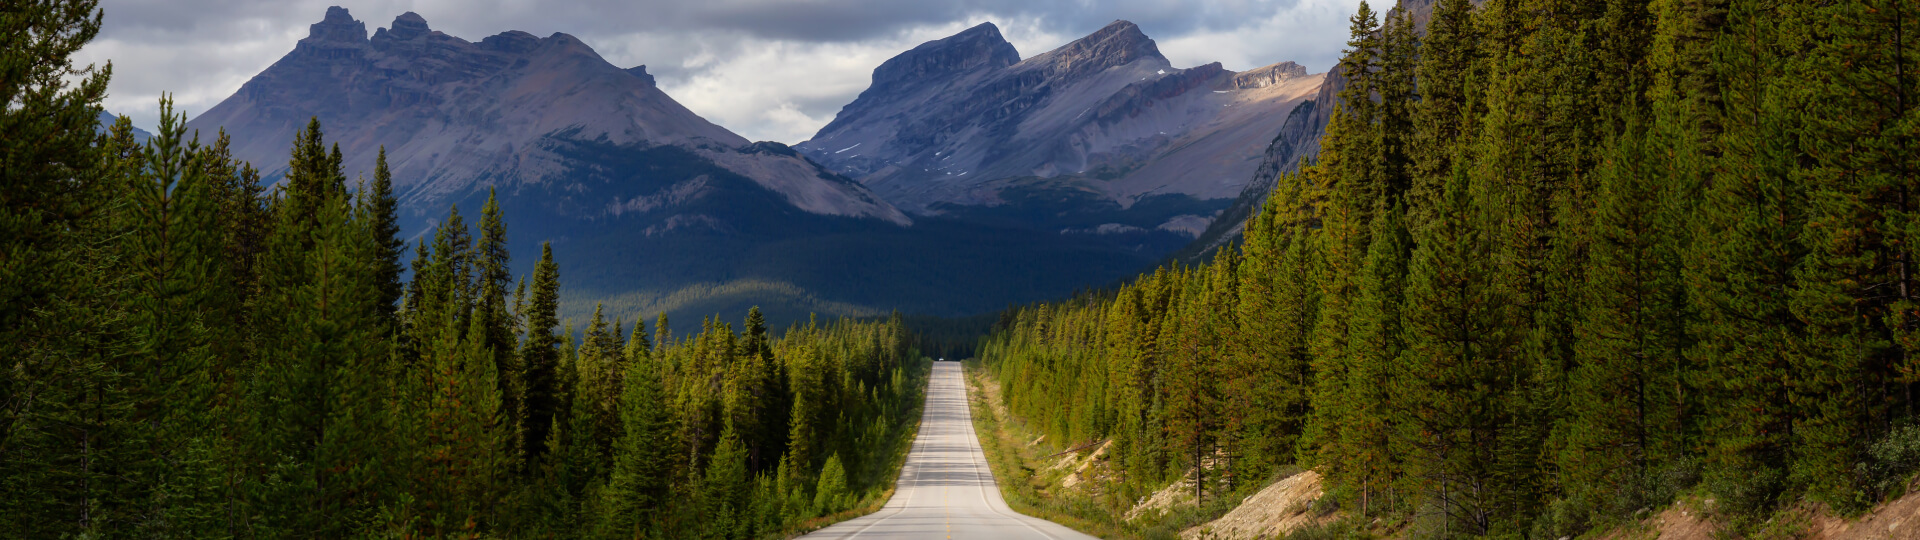 Scenic Road in the Canadian Rockies